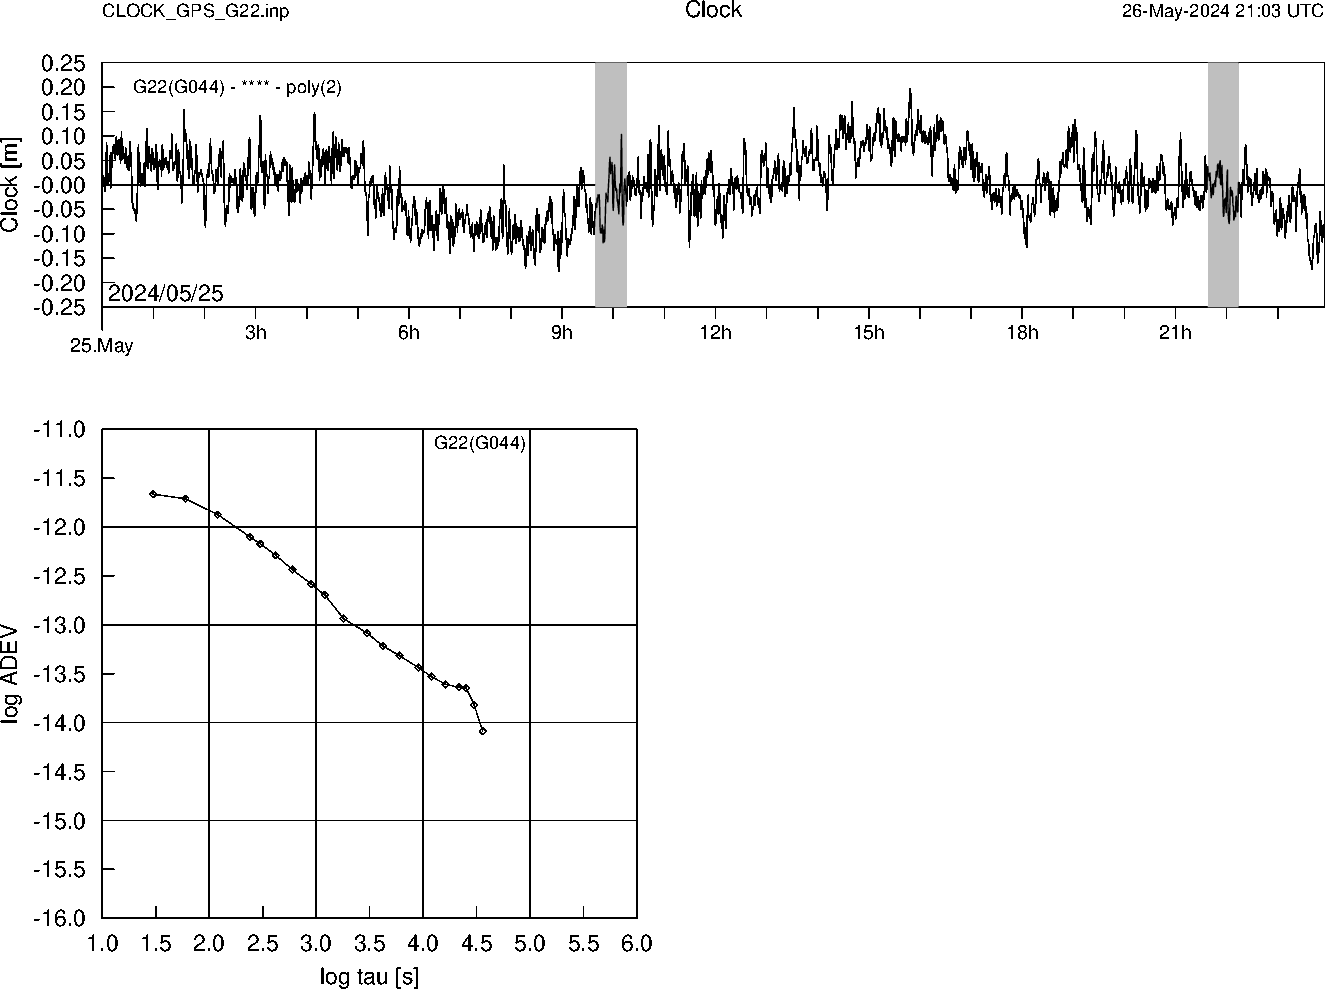 GPS G22 Clock Time Series and Allan Deviation